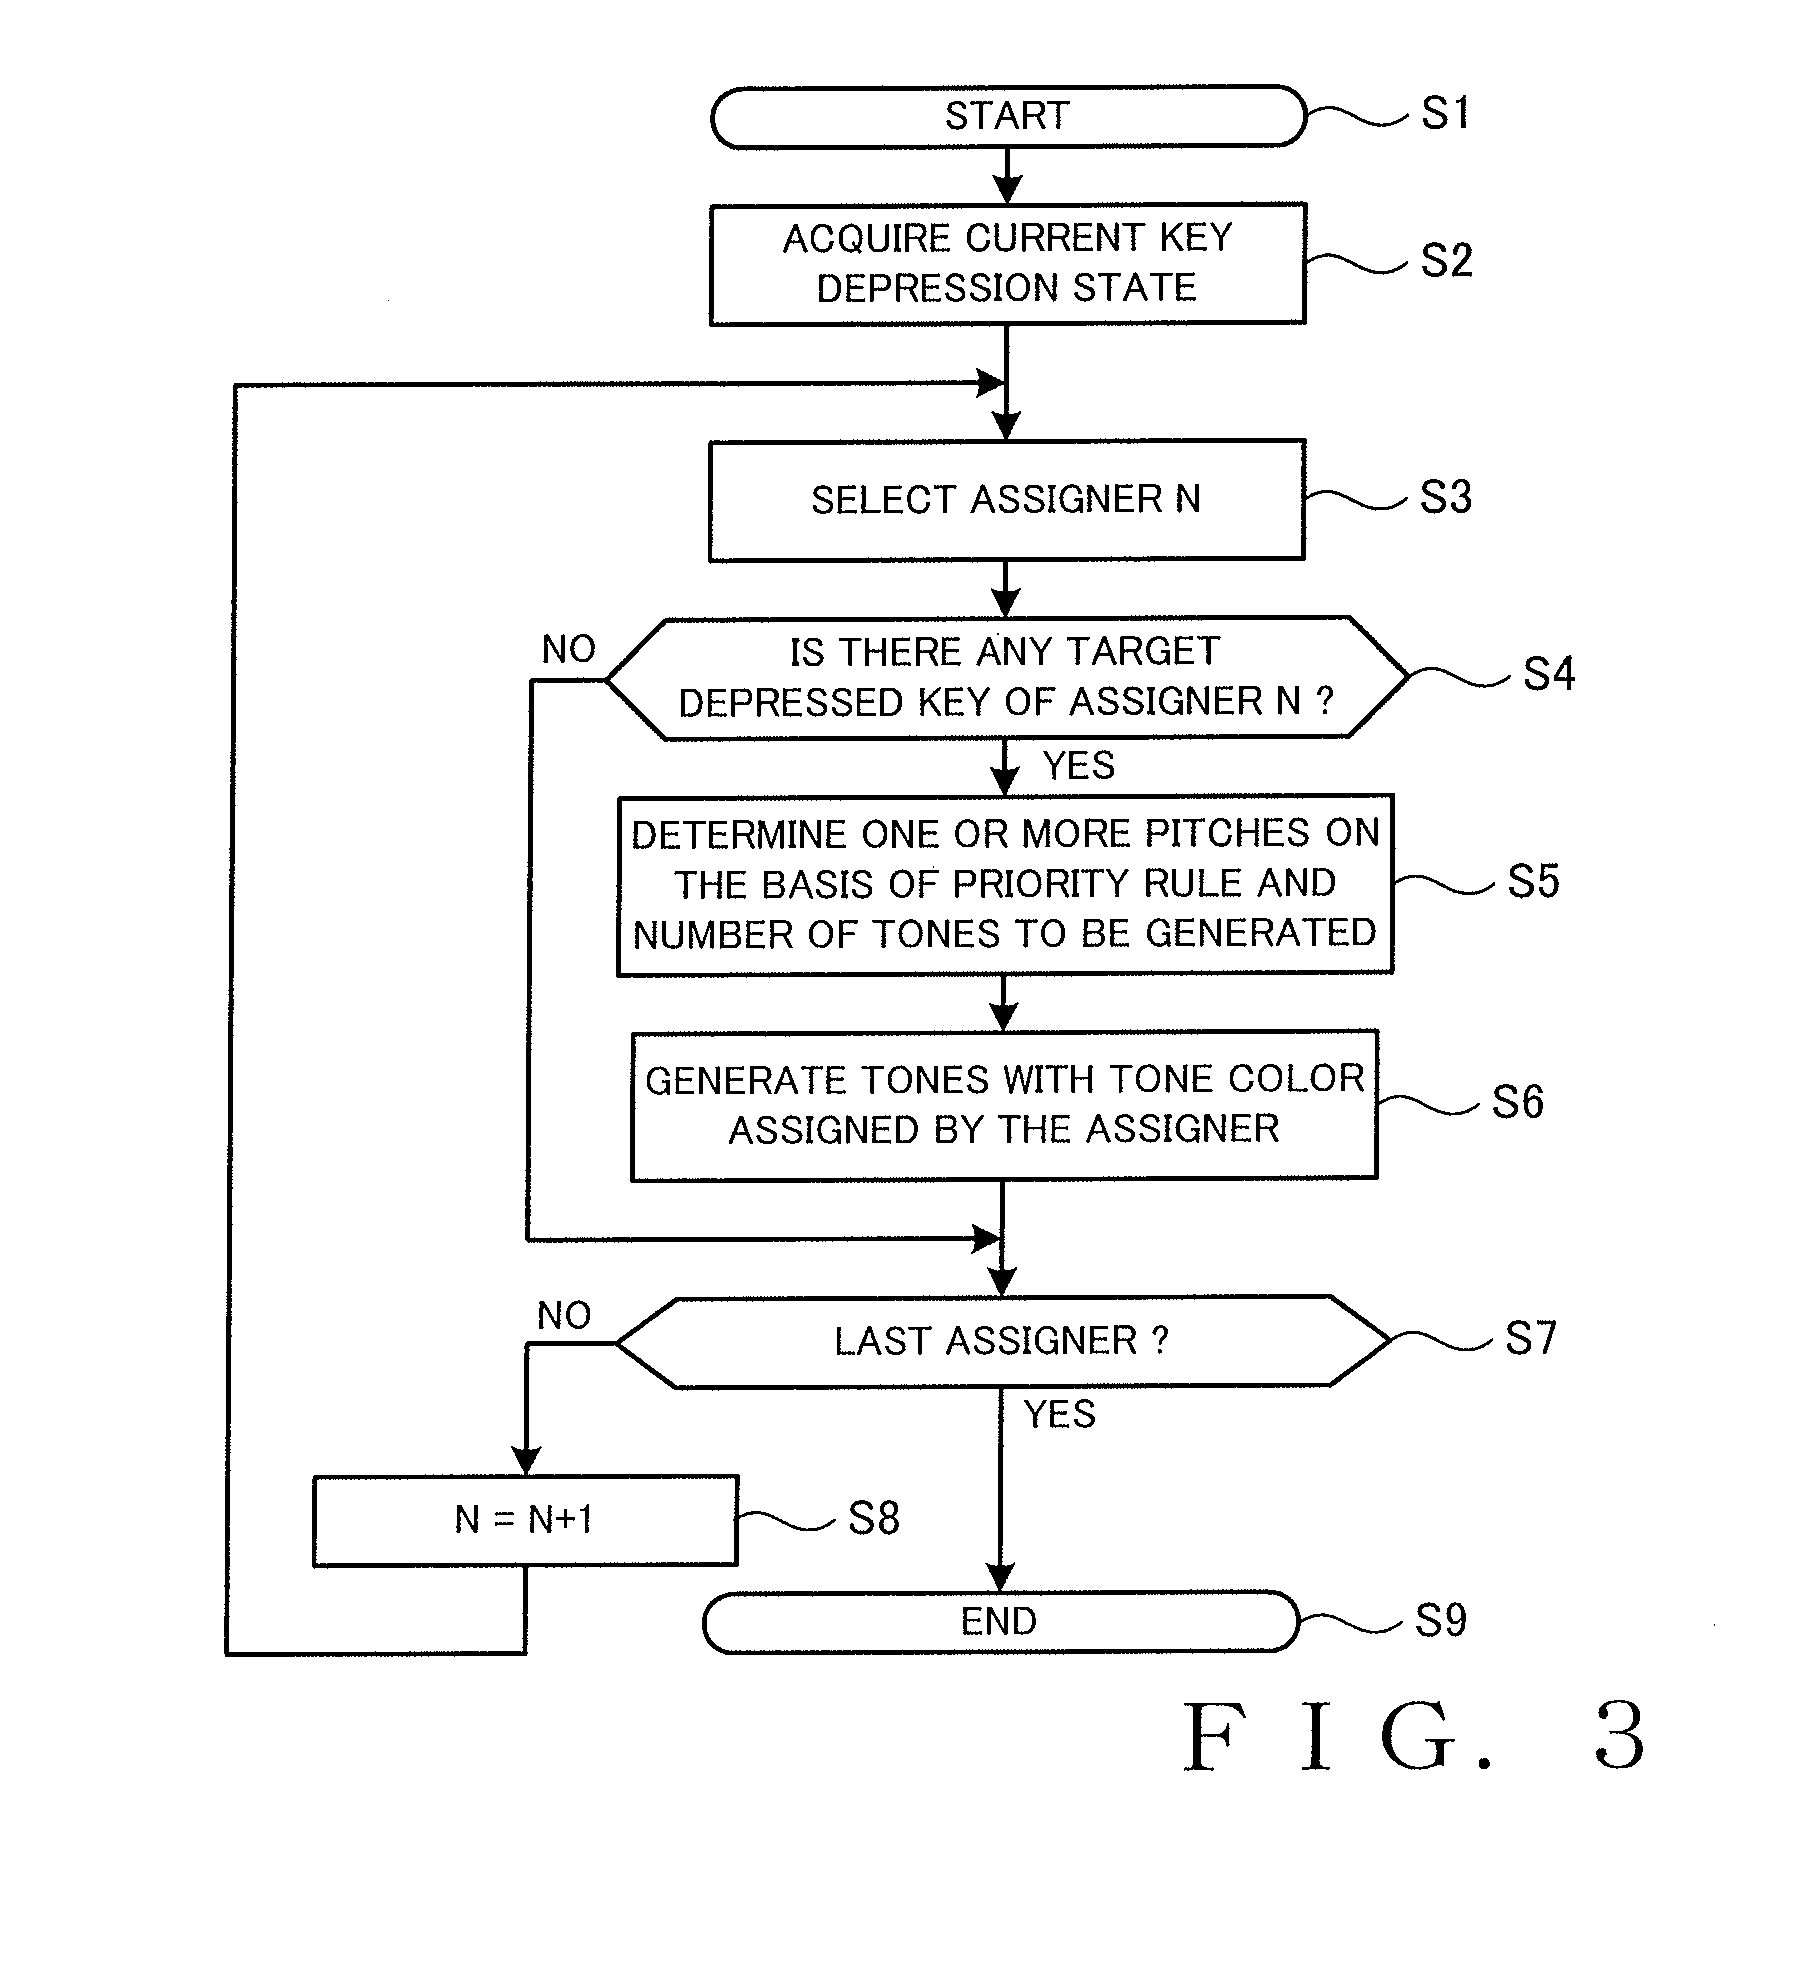 Tone generation assigning apparatus and method